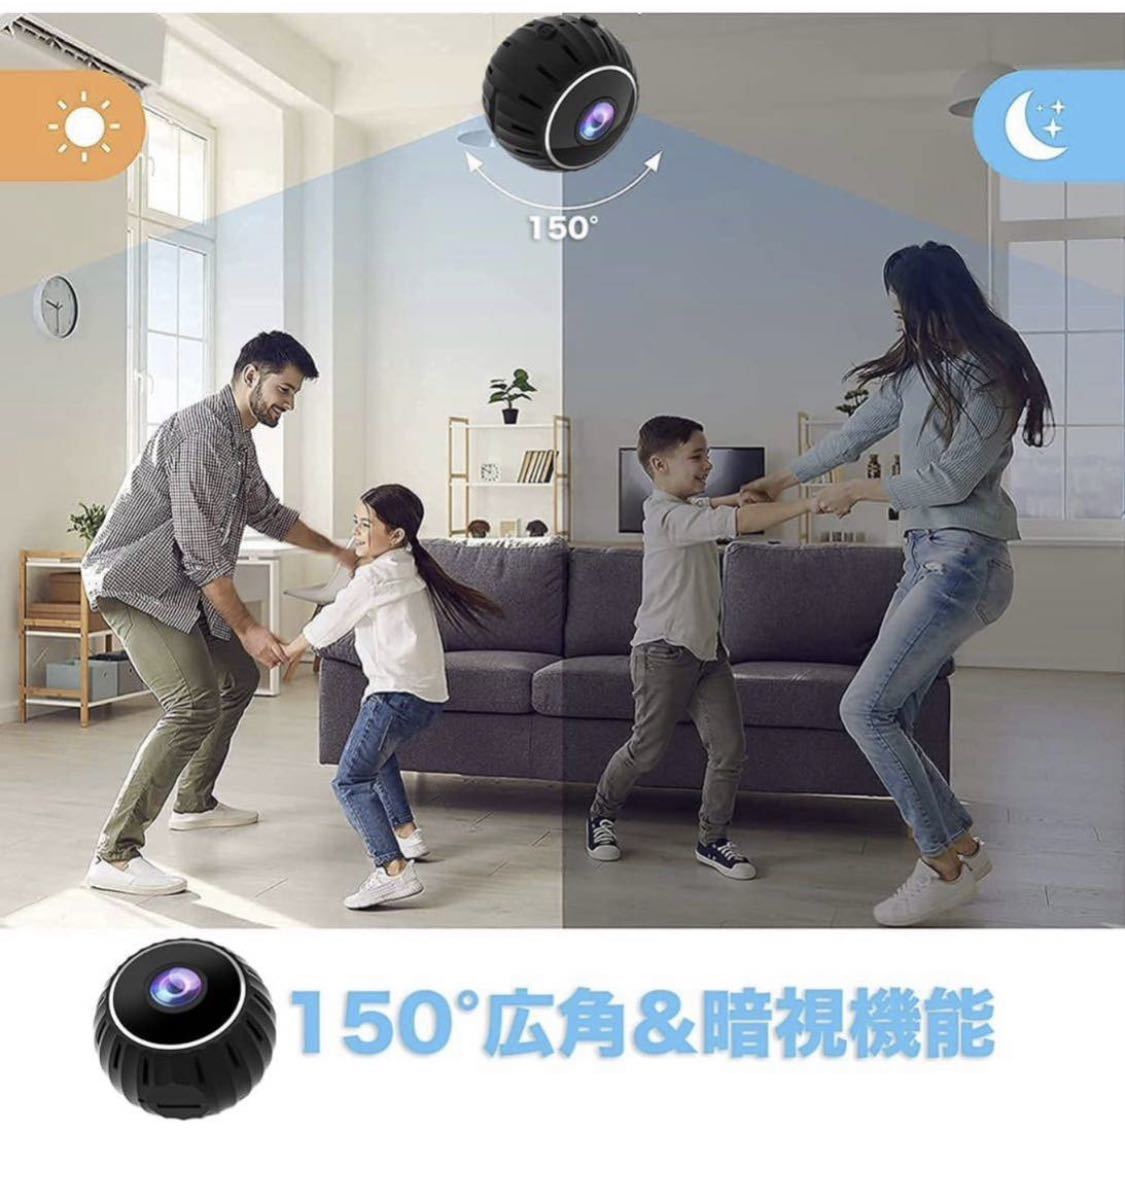 WIFI security camera high resolution small size camera 128GB correspondence WIFI with function moving body detection crime prevention monitoring video recording recording function .. monitoring 150° wide-angle loop video recording 